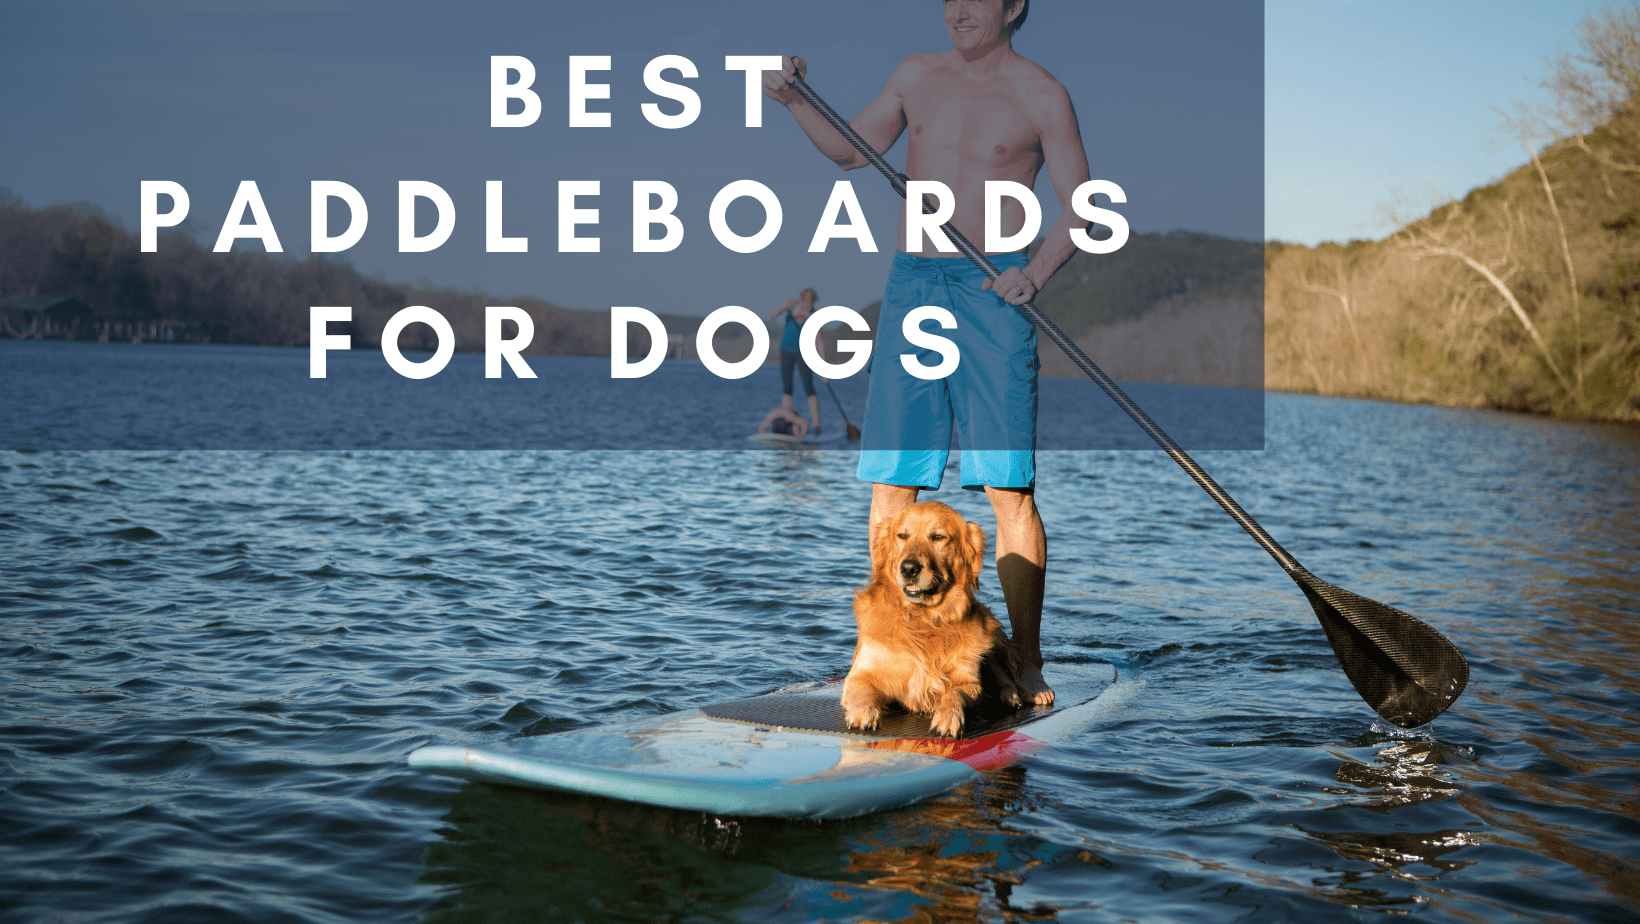 Best Paddleboards for Dogs